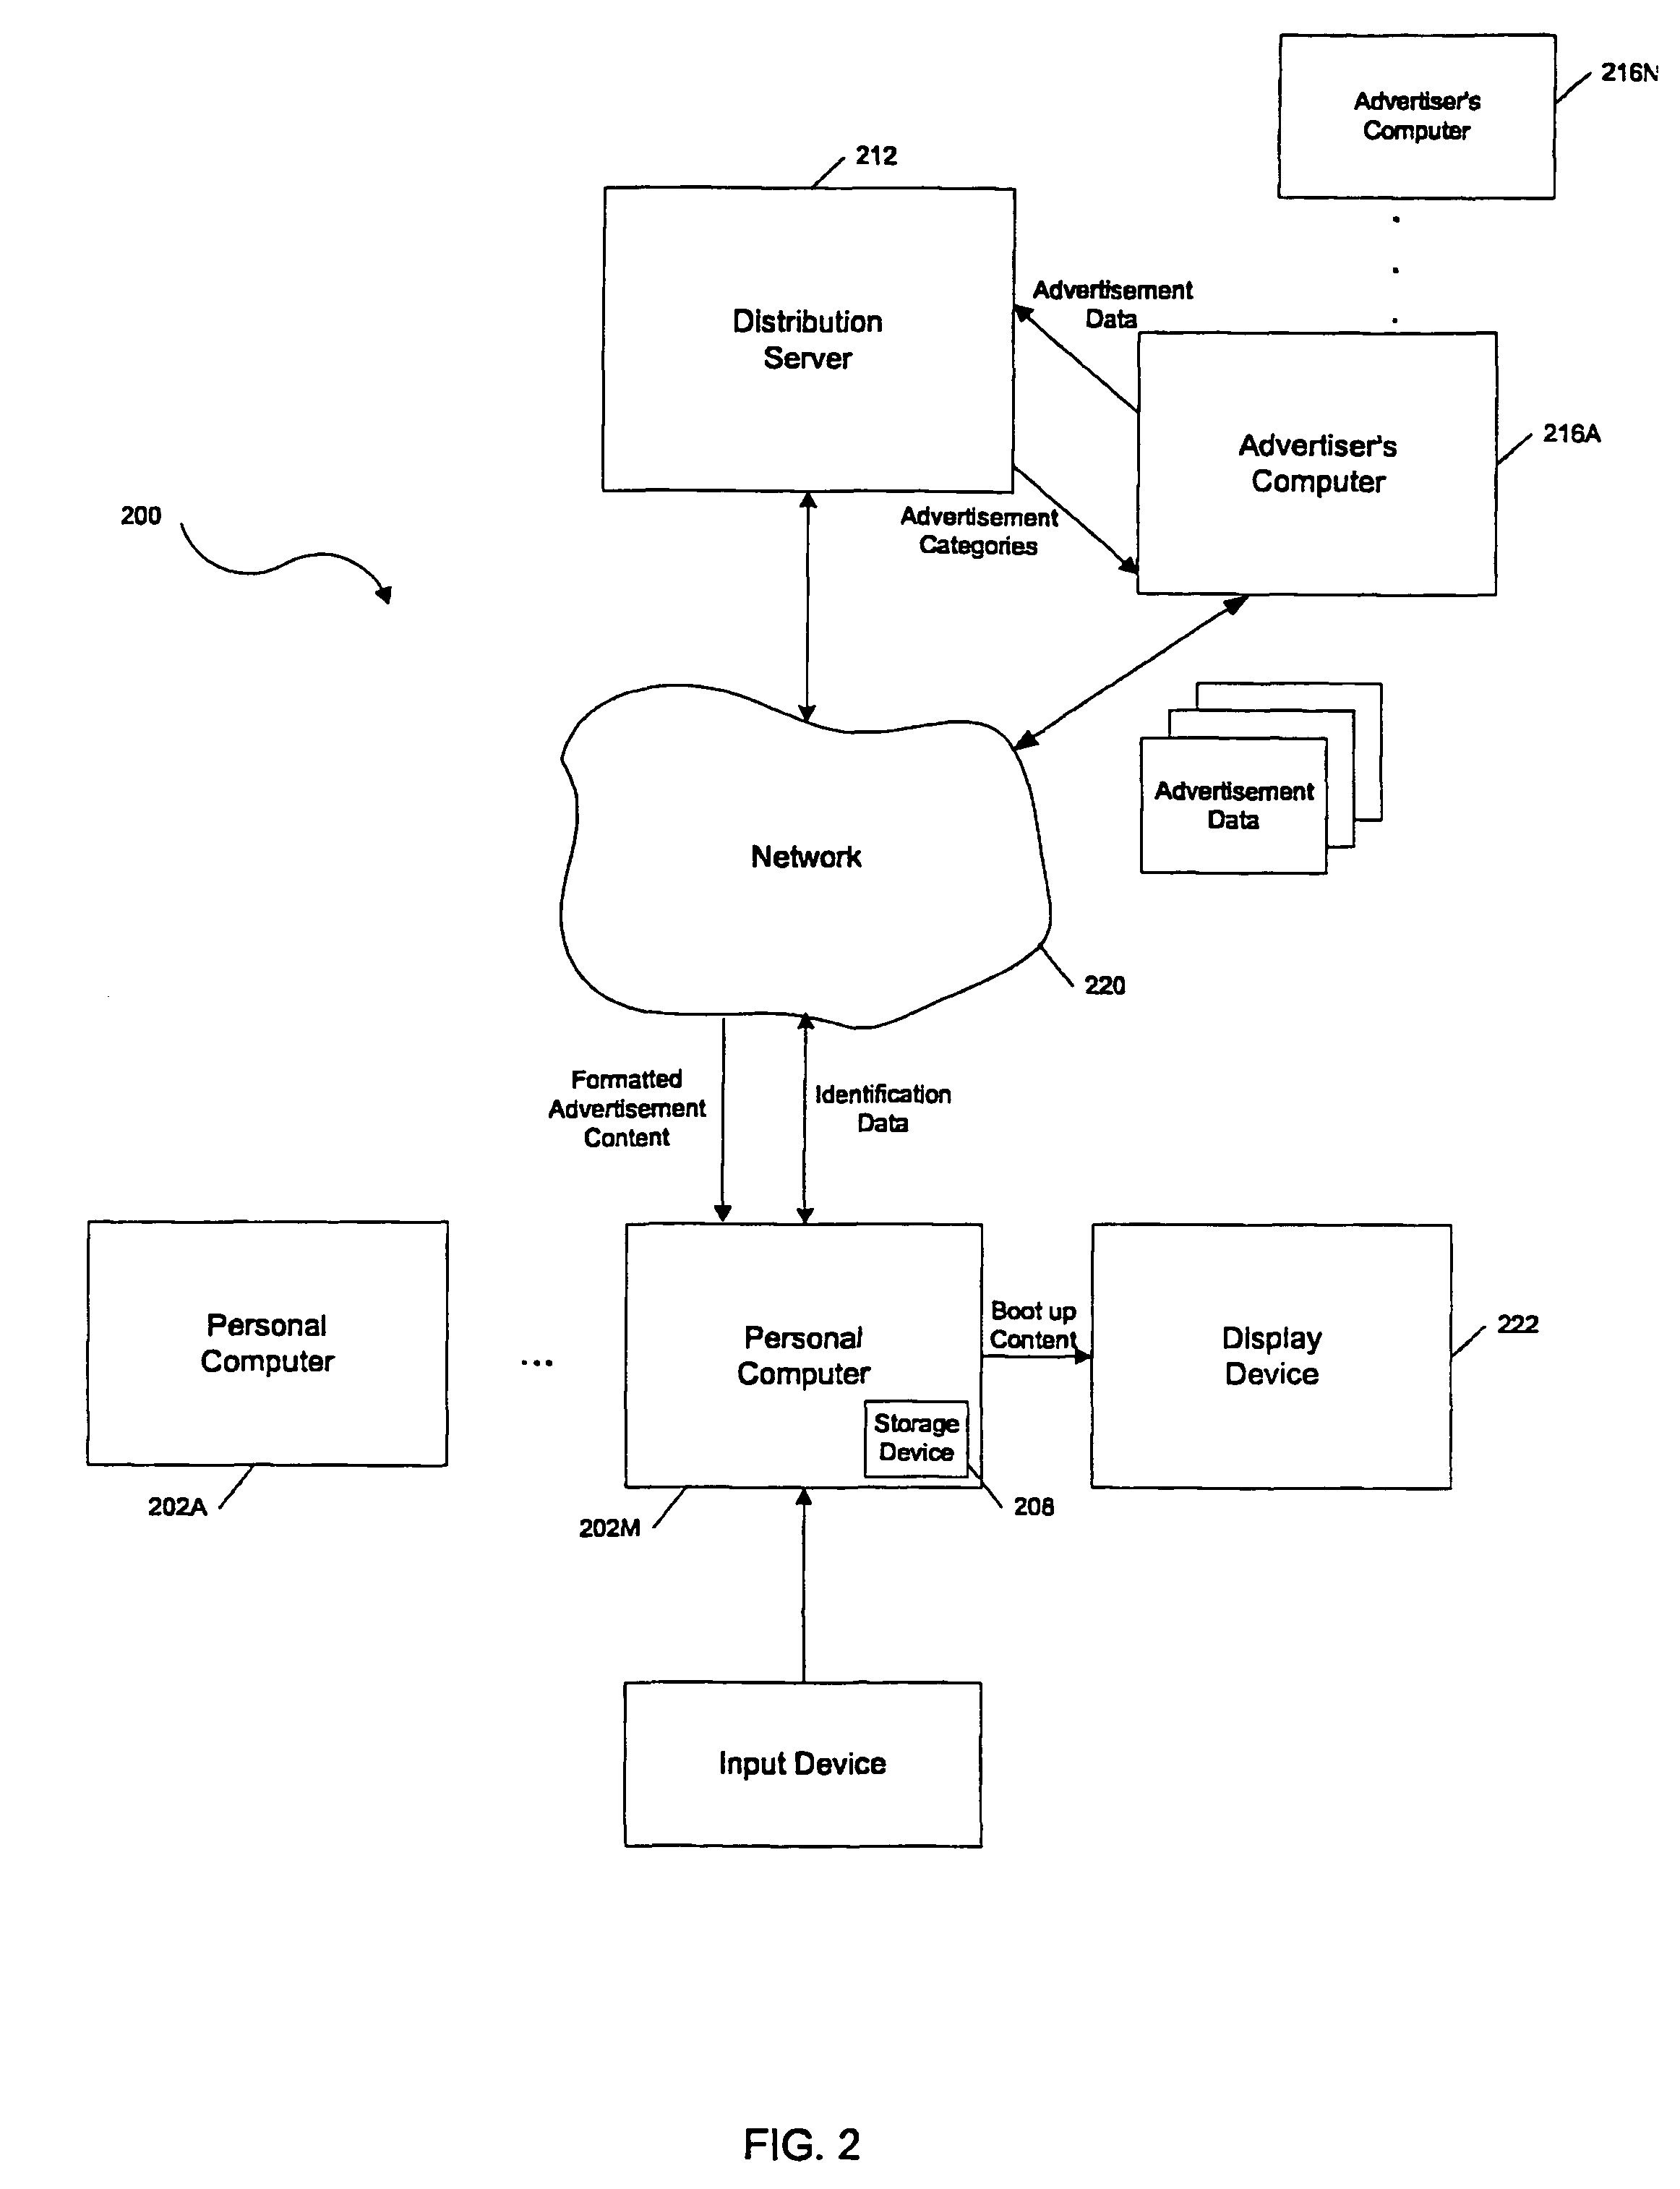 System and method of receiving advertisement content from advertisers and distributing the advertising content to a network of personal computers